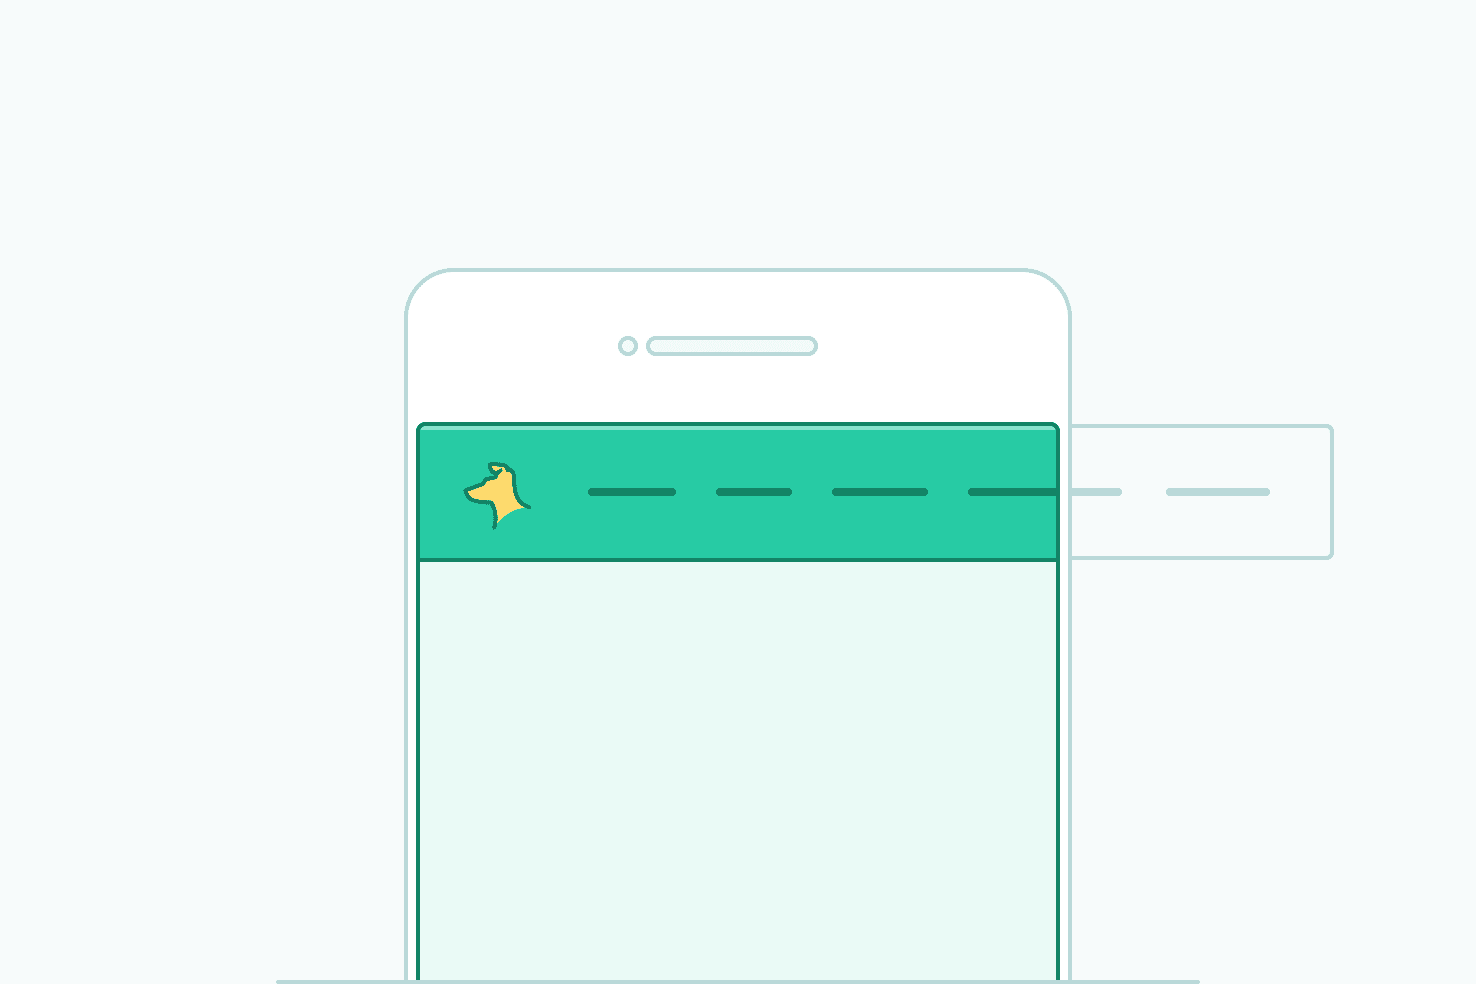 Simple horizontal scrolling menu with CSS (featured image)